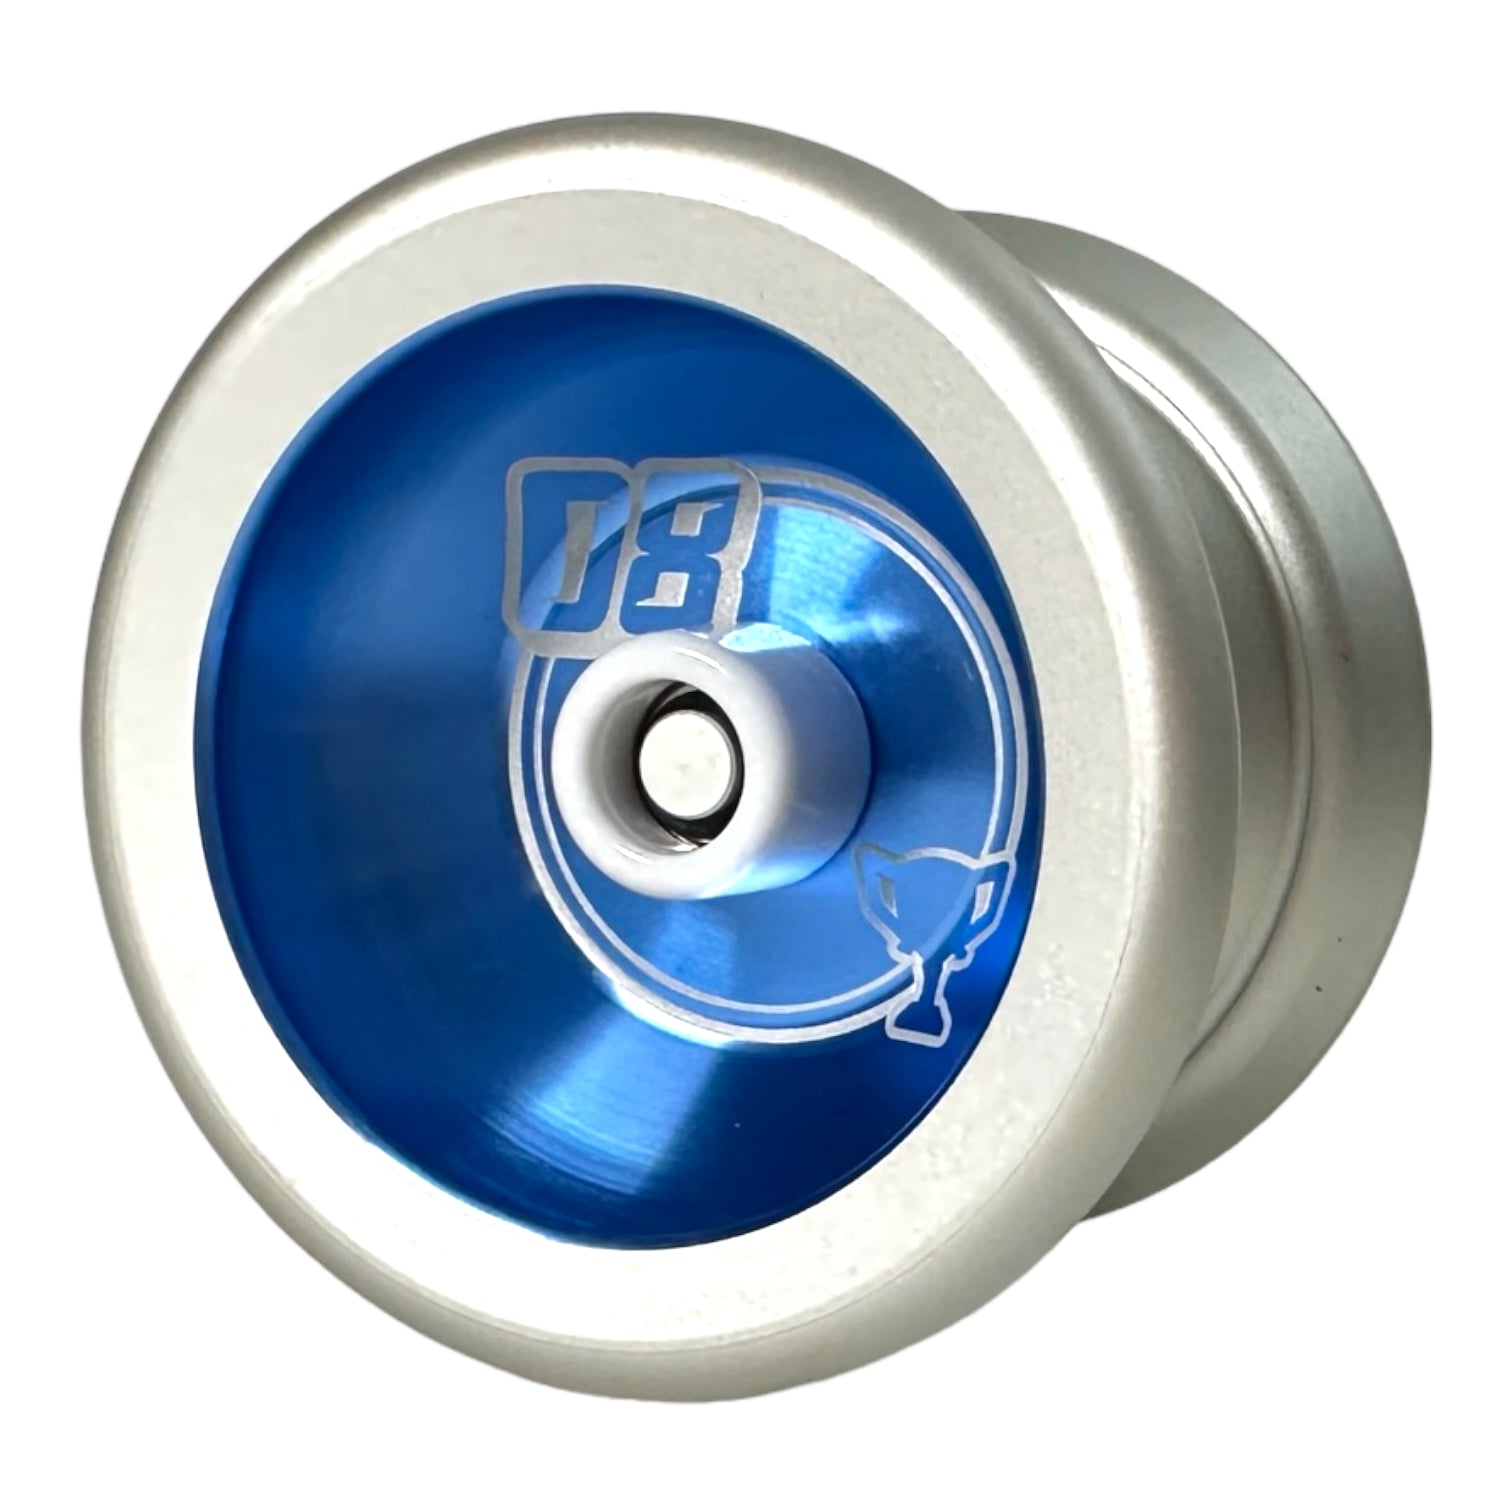 Superstar YoYo (2009) silver and blue champion